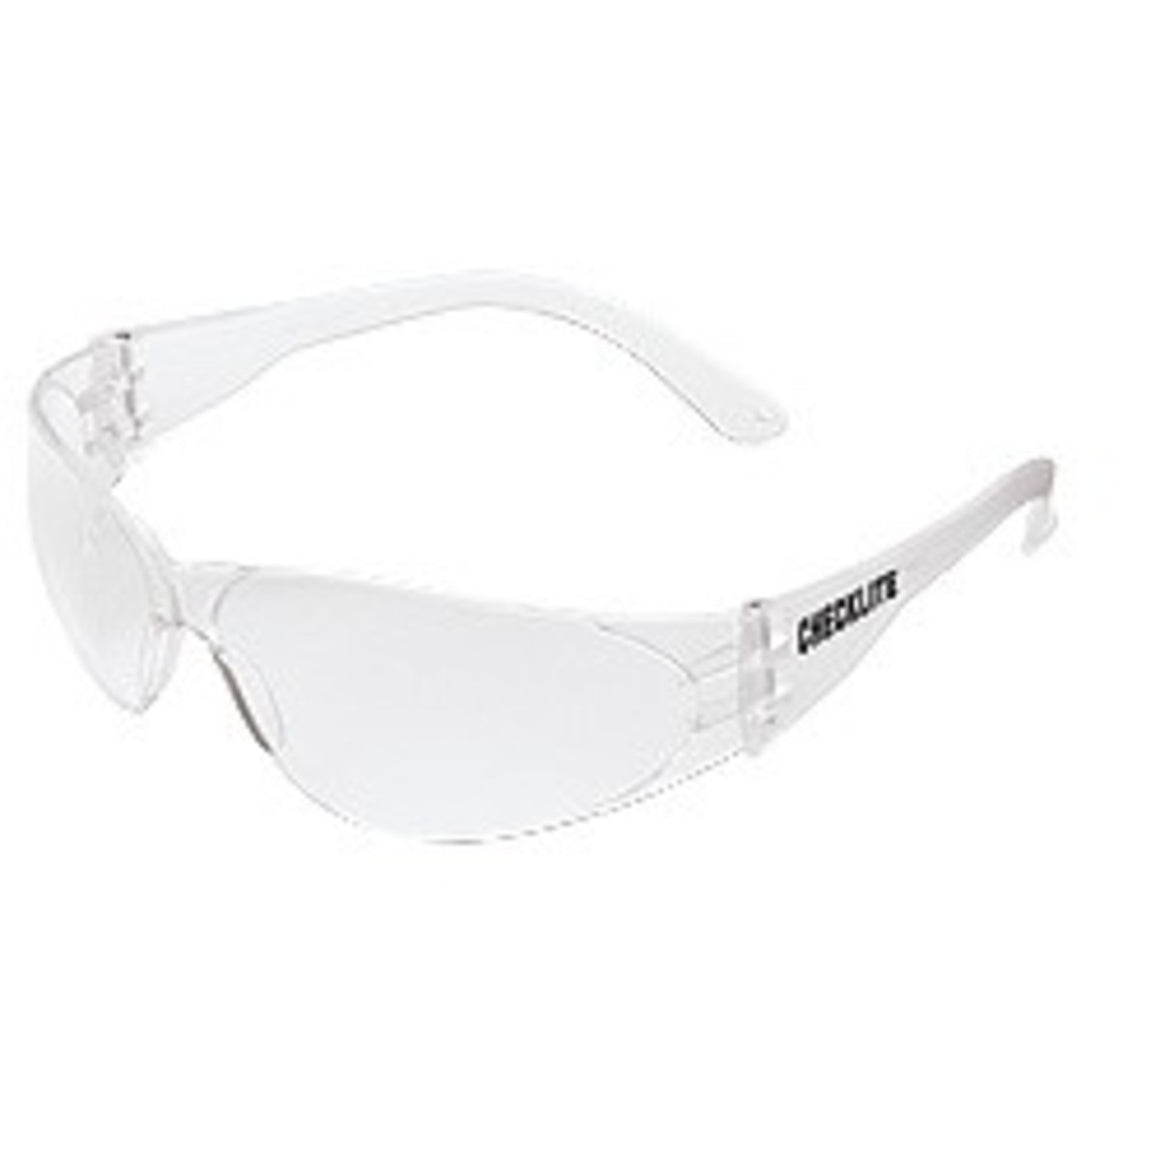 MCR Checklite Safety Glasses,Wrap Around,Clear Lens